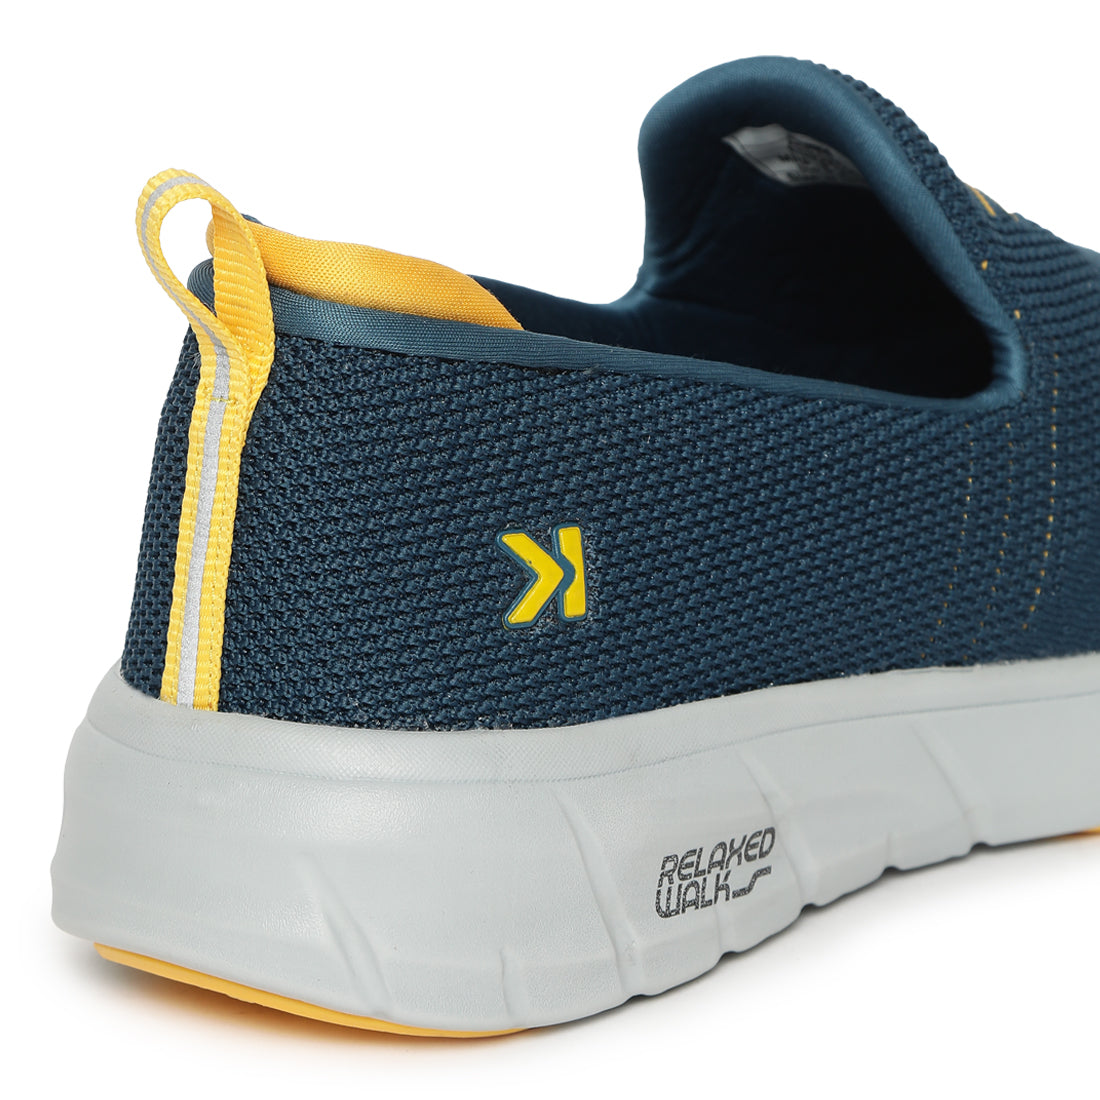 Eeken ESHGIA104 Teal Blue And Yellow Athleisure Shoes For Men